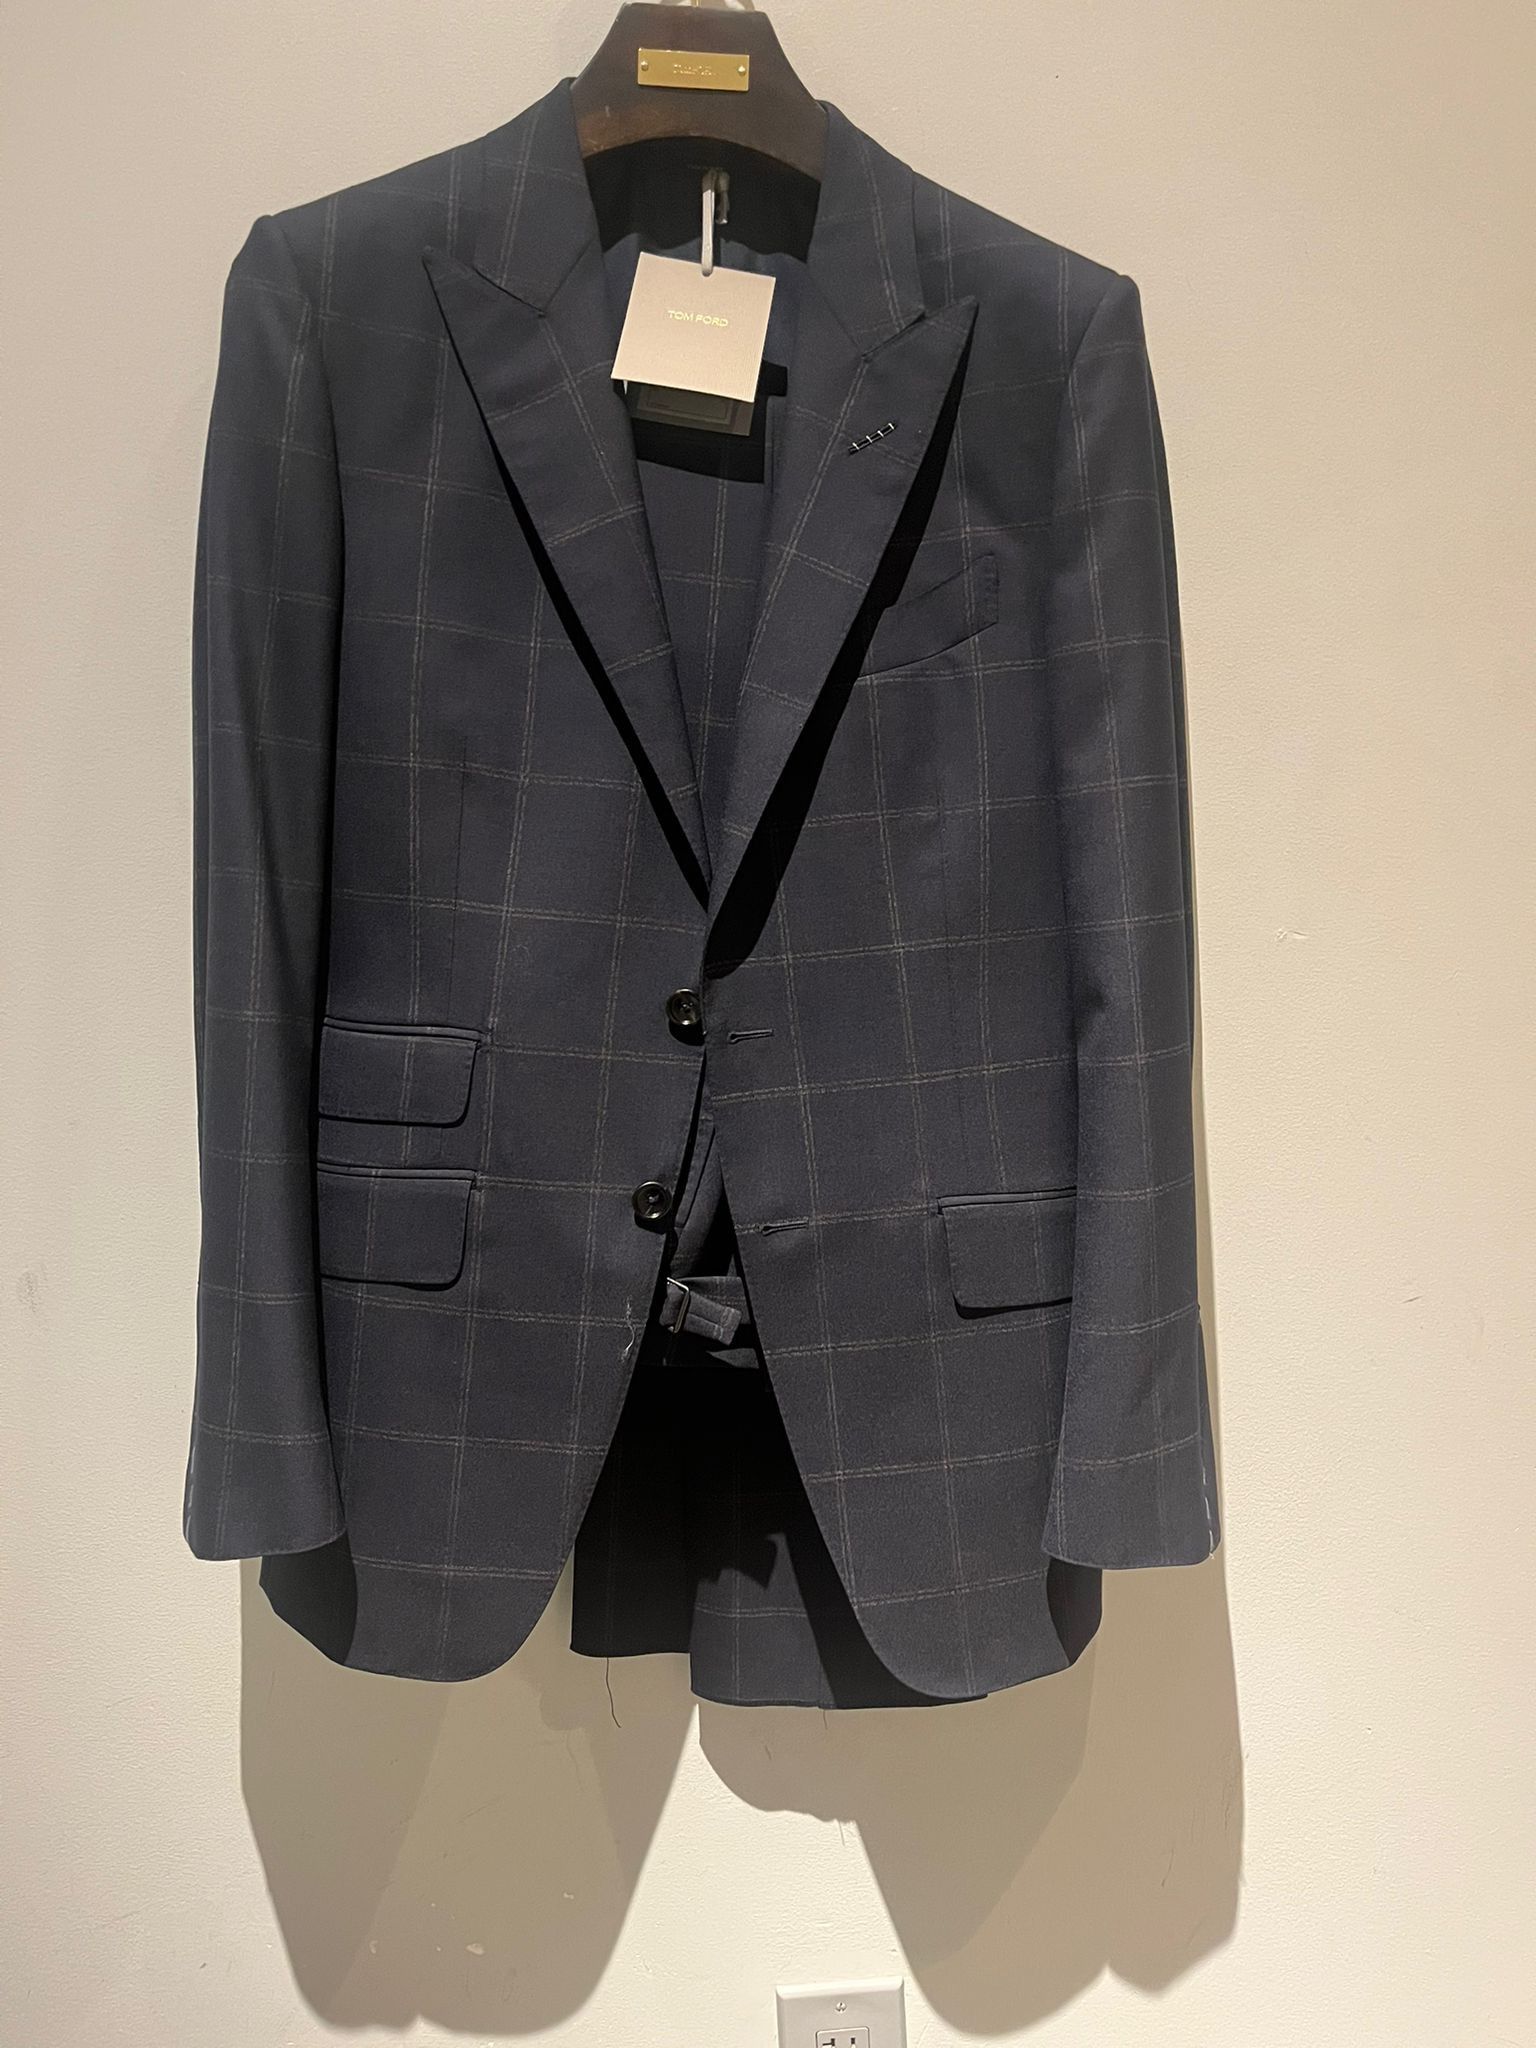 Tom Ford Oconnor Suits in Navy | Grailed